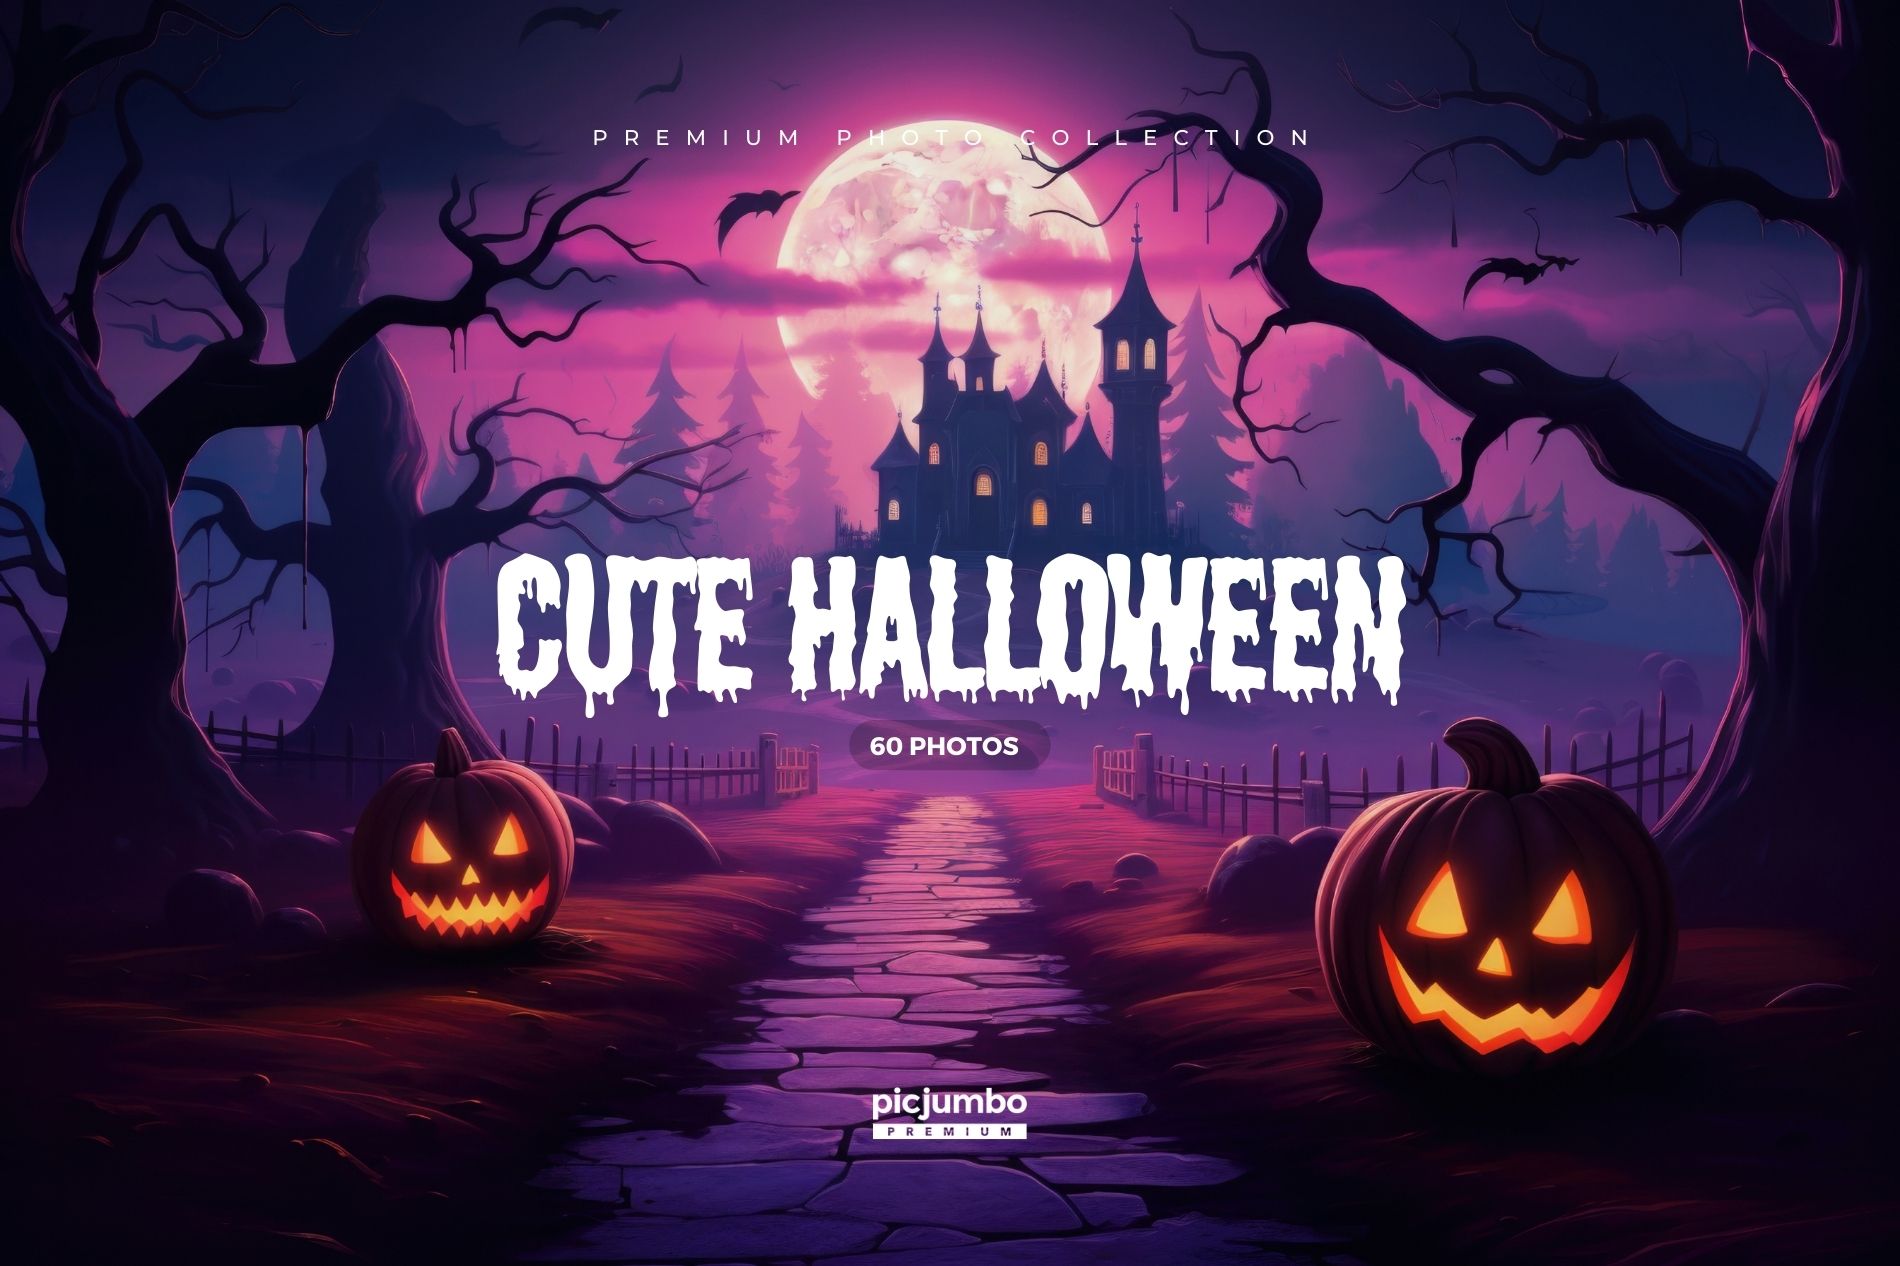 Download hi-res stock photos from our Cute Halloween PREMIUM Collection!